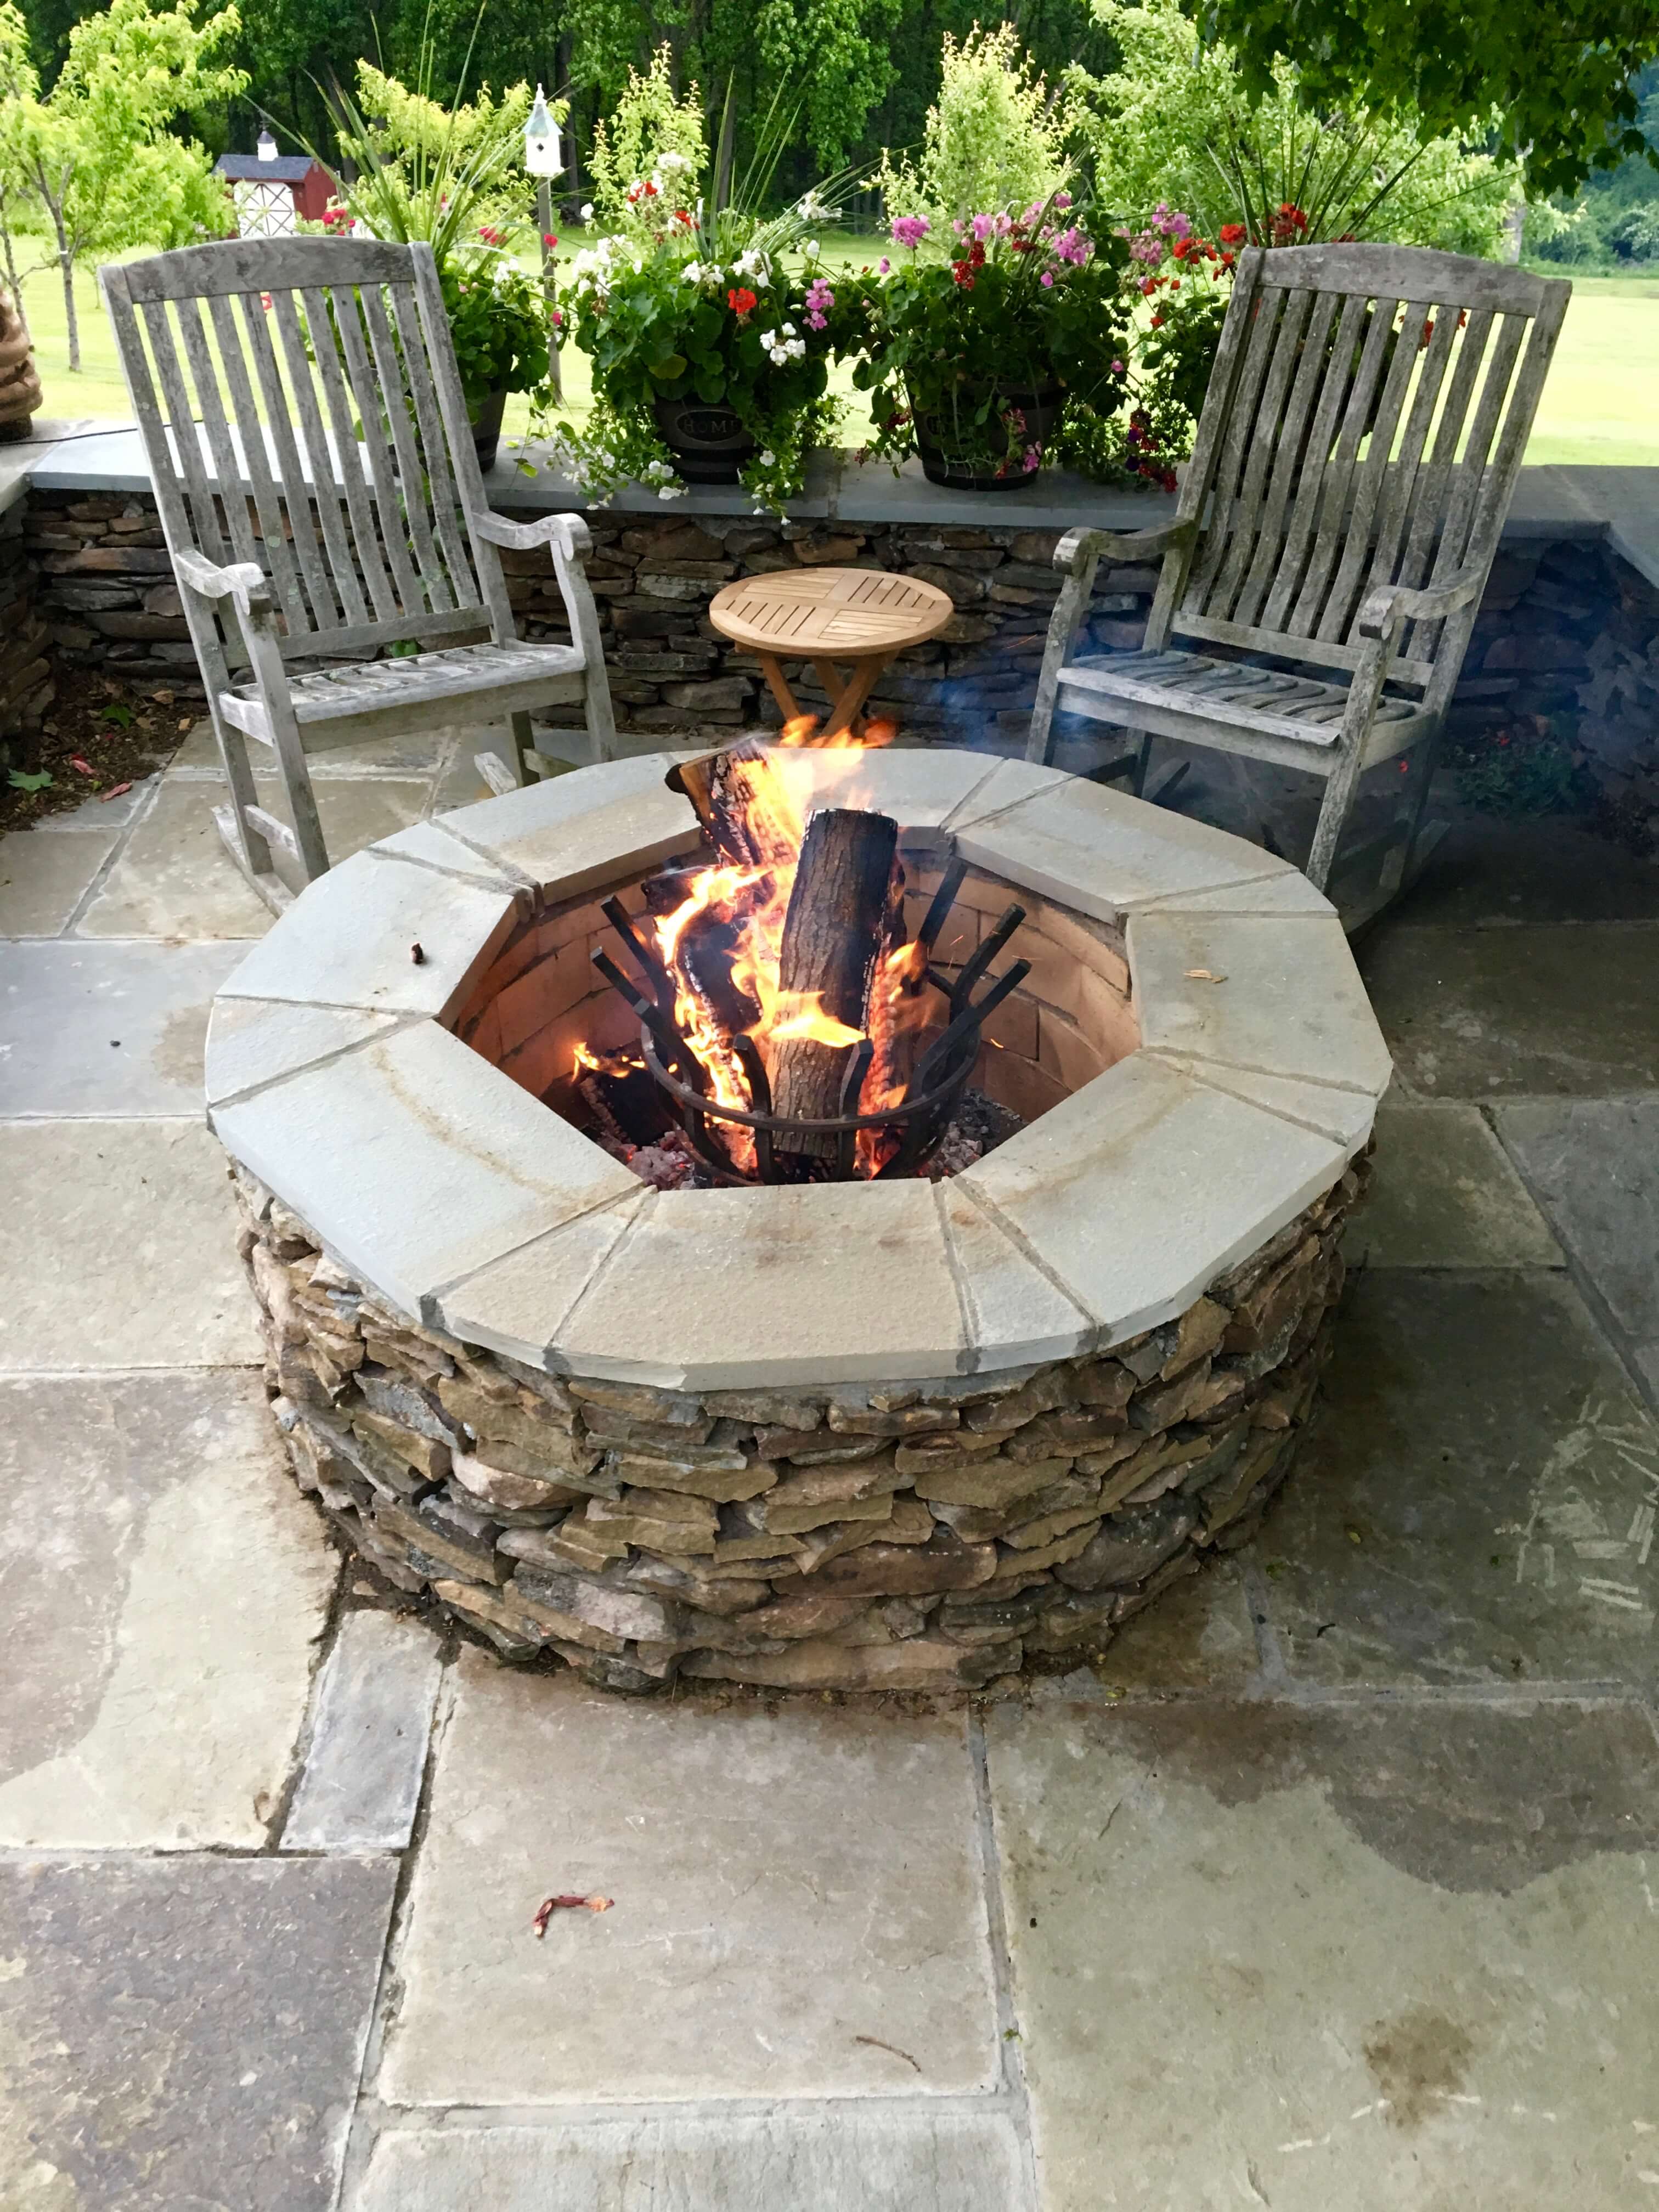 Large Round Outdoor Fire Pit Kit: Centerpiece for Outdoor Entertaining